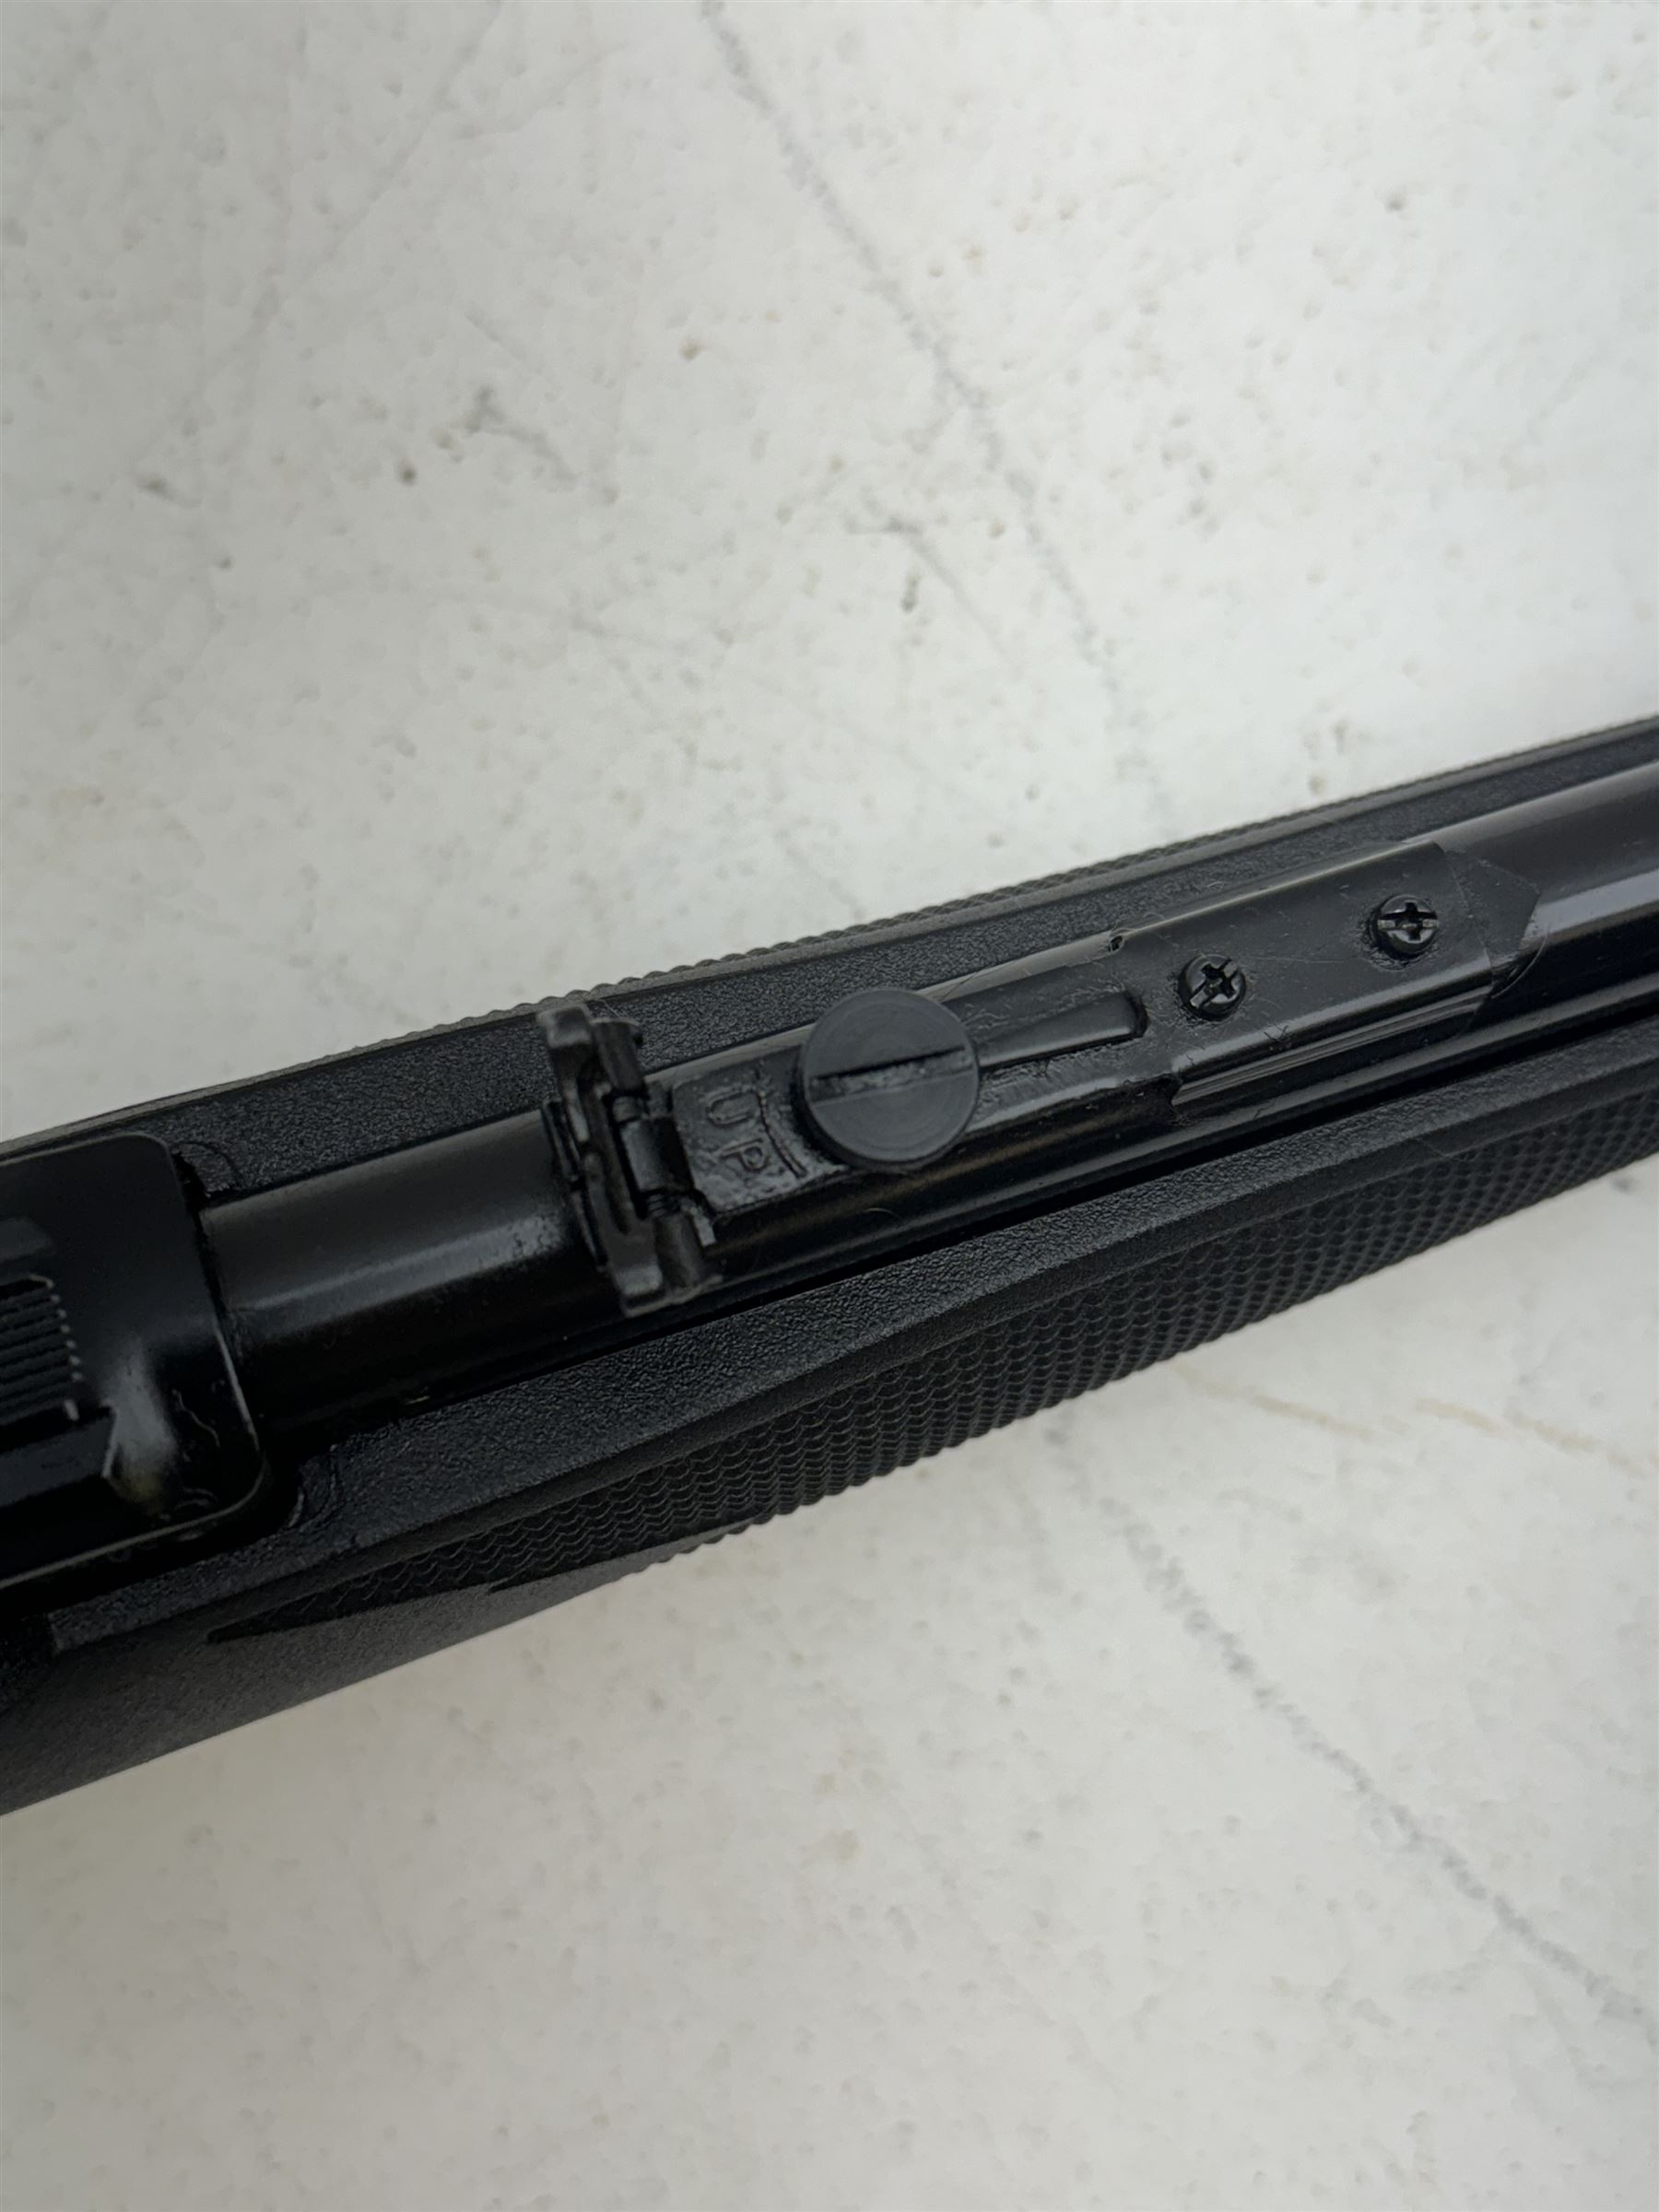 SECTION 1 FIREARMS CERTIFICATE REQUIRED - New Magtech MOD 7022 semi-auto .22 rifle 61cm (18") barrel - Image 15 of 15